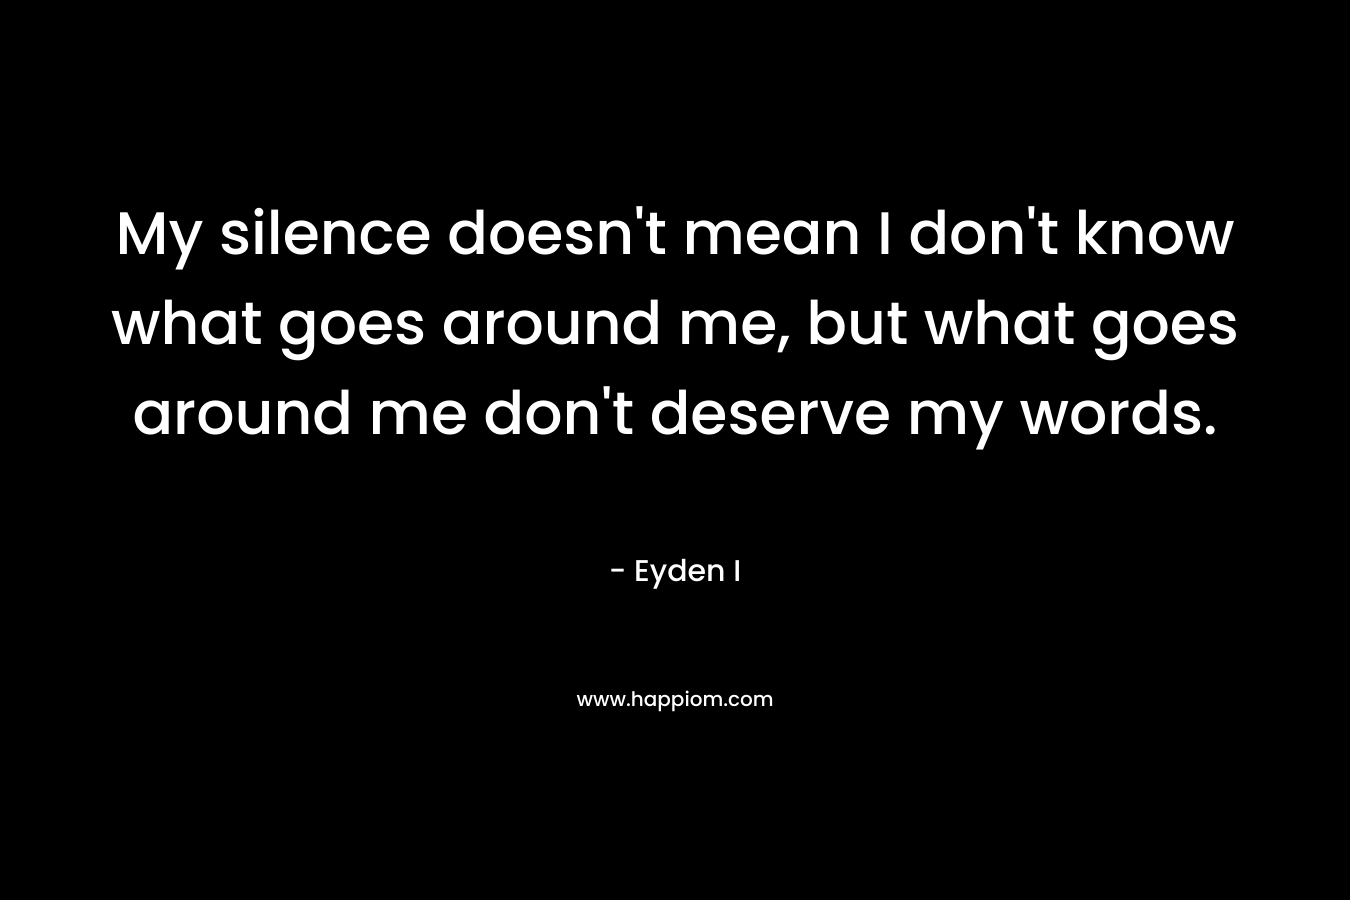 My silence doesn't mean I don't know what goes around me, but what goes around me don't deserve my words.